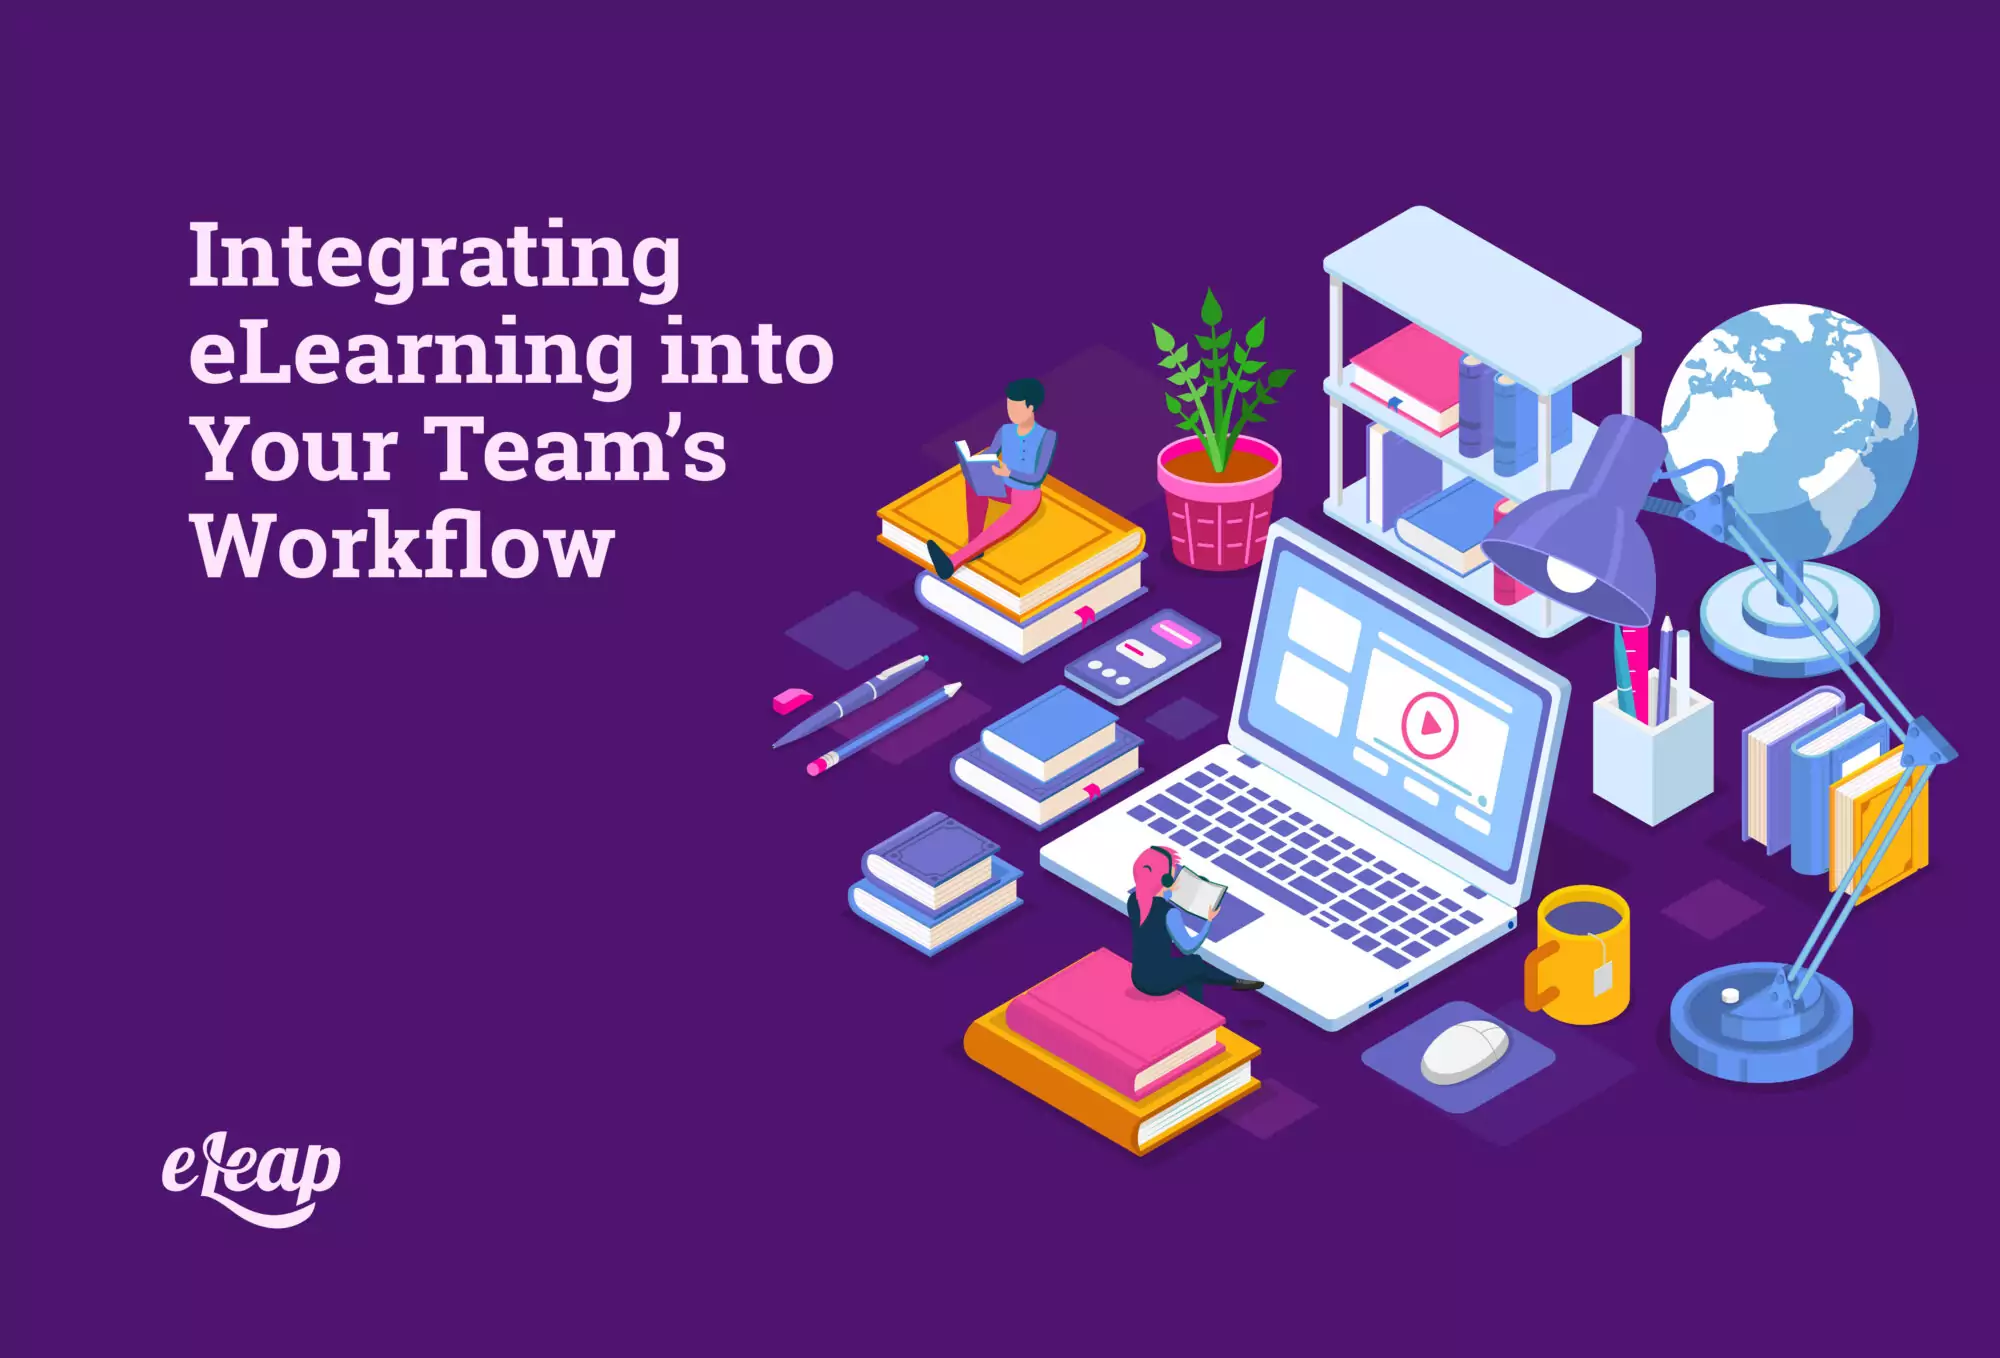 Integrating eLearning into Your Team's Workflow